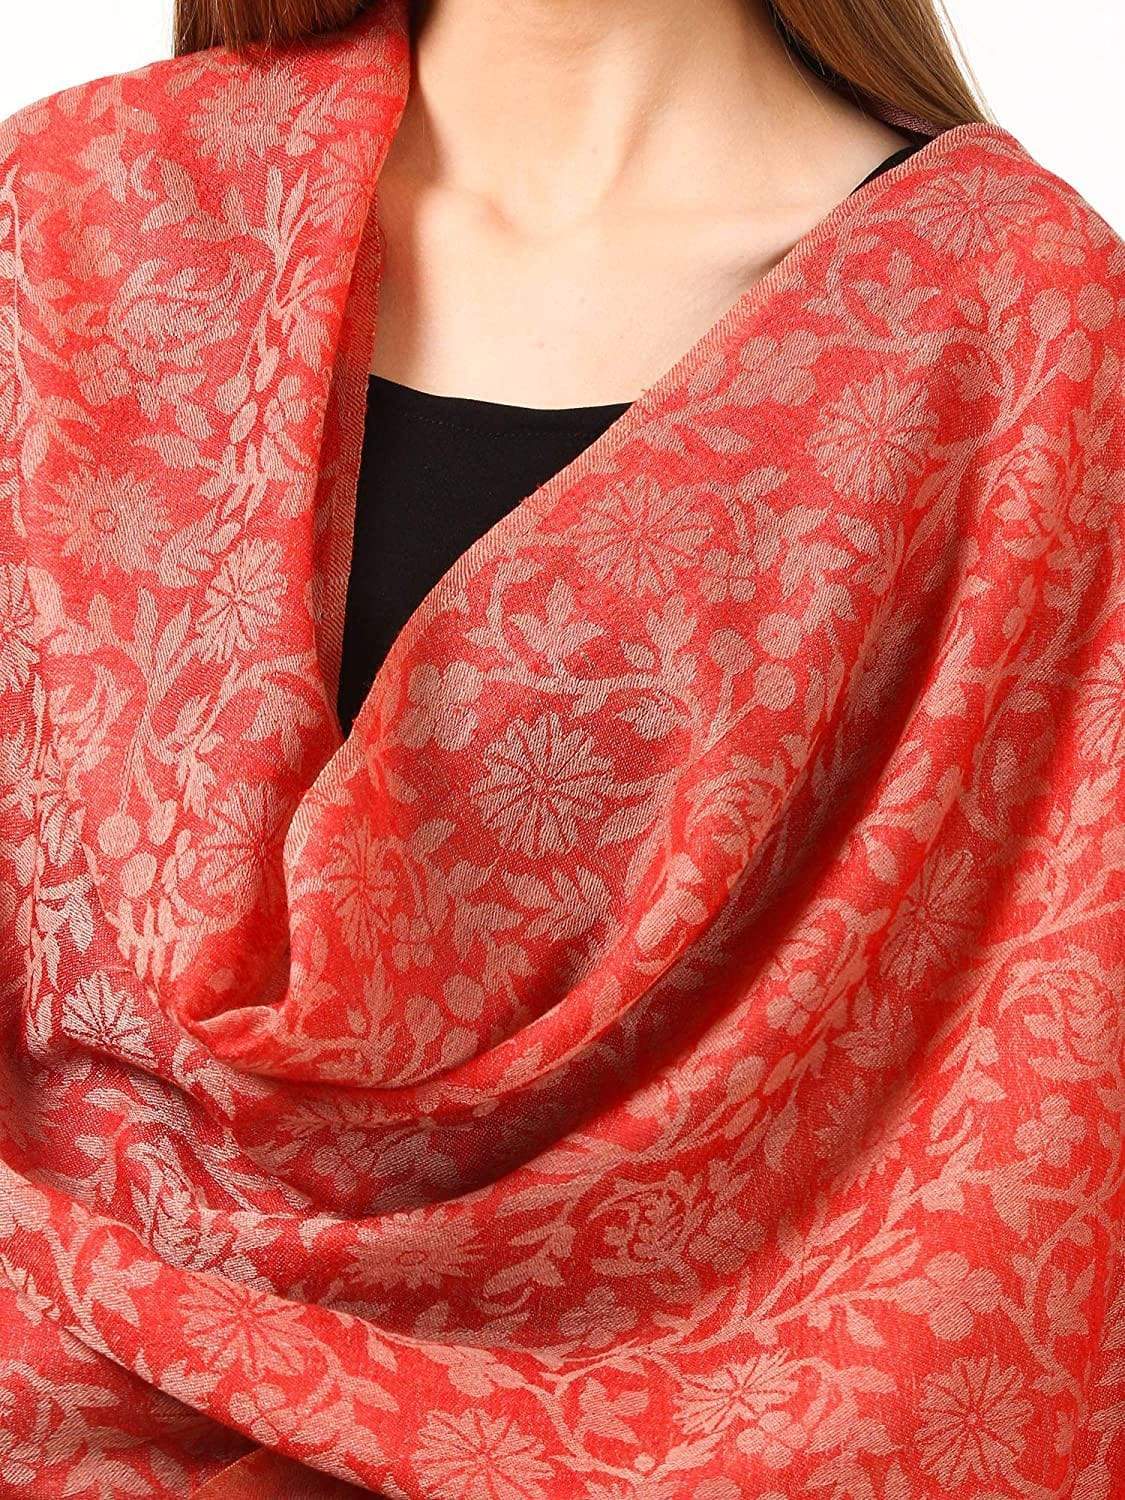 Pashtush India 70x200 Women's Silk-Pashmina Reversible Floral Scarf, Soft and Warm, Scarlet Red